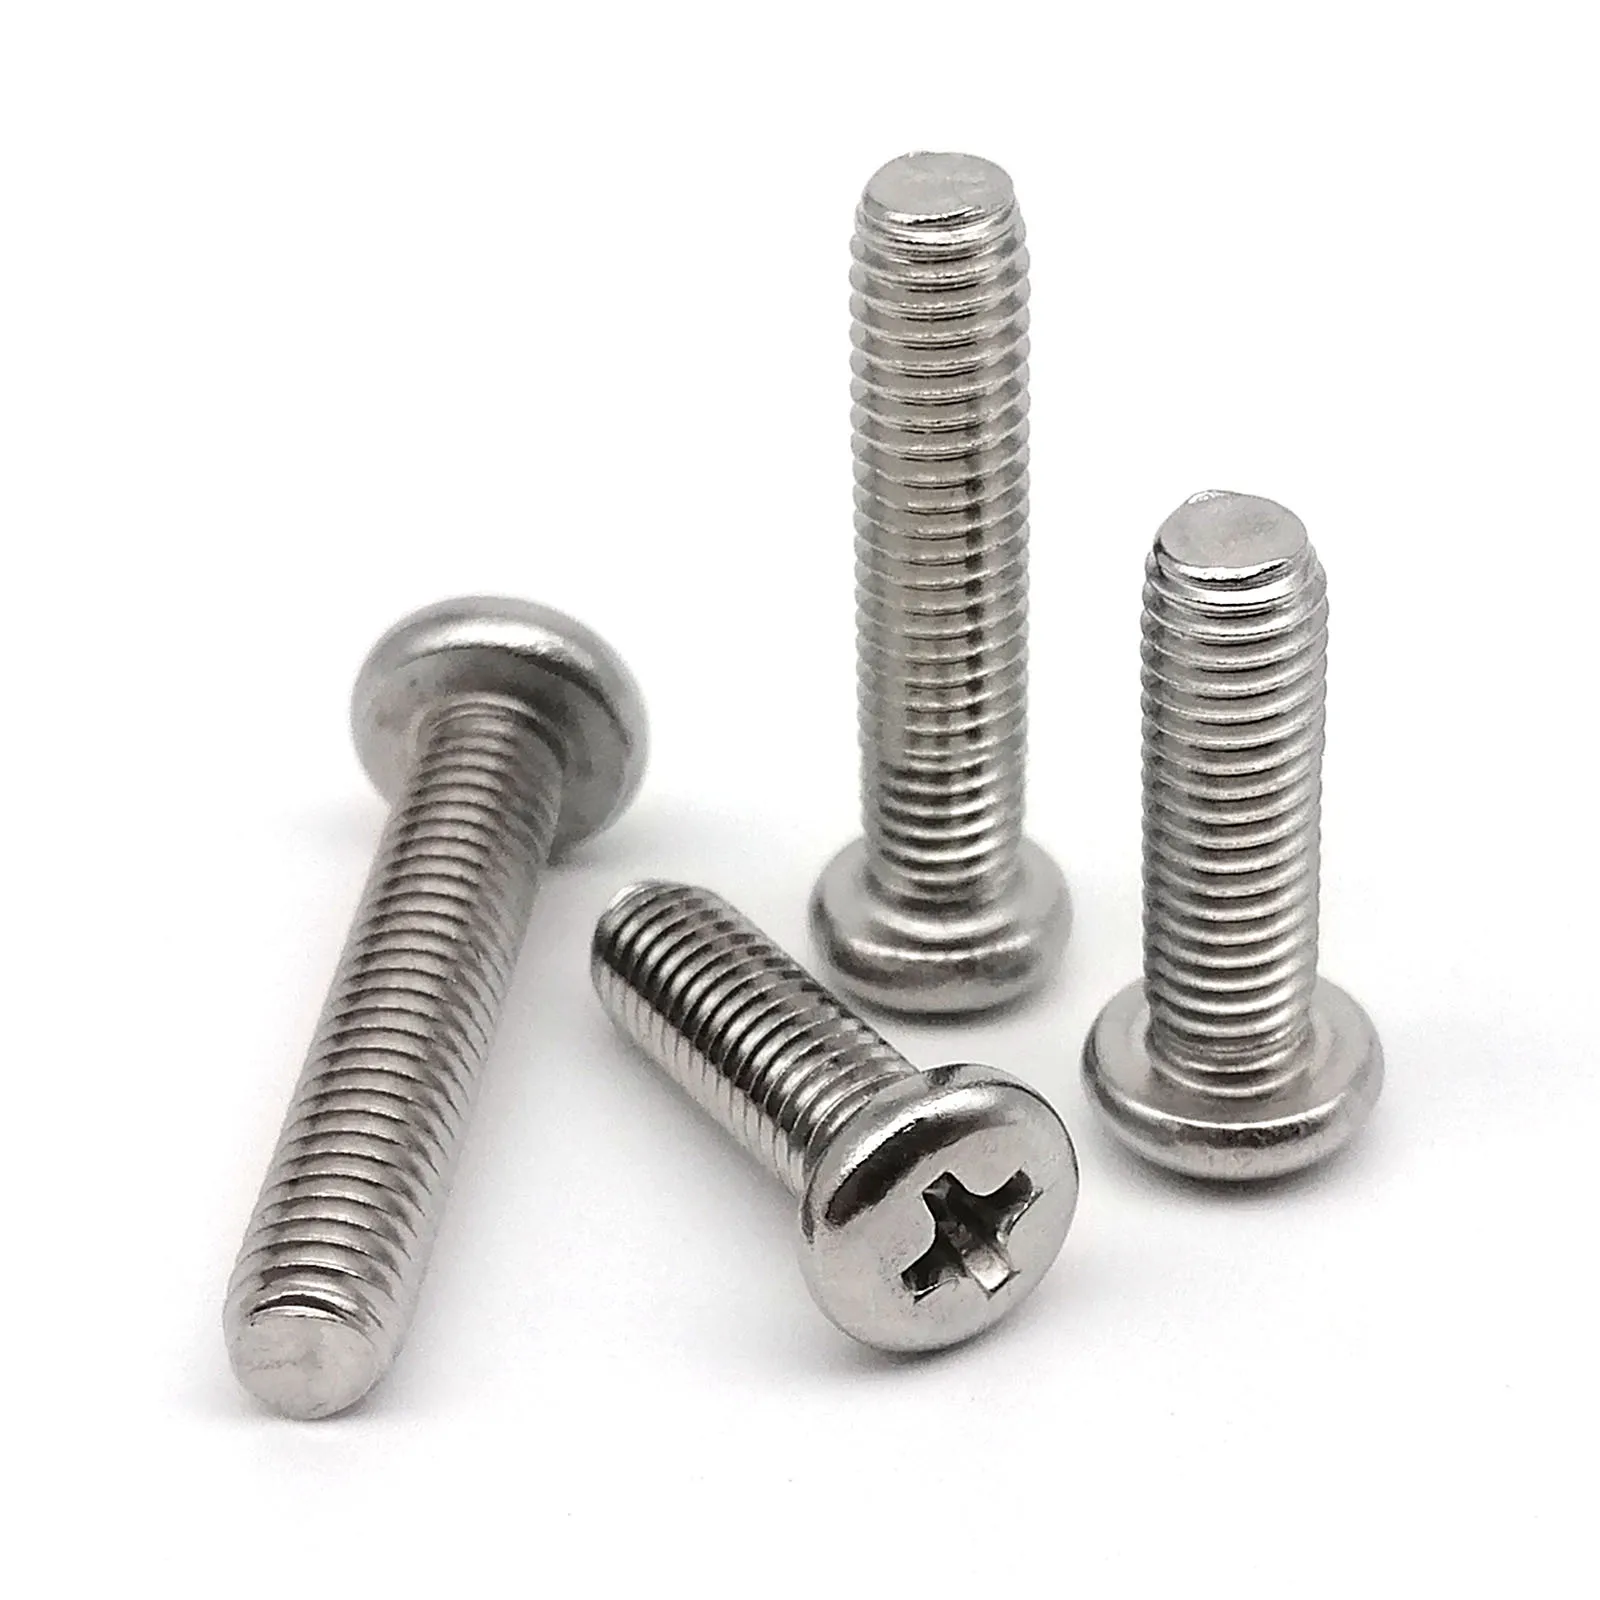 M2 M2.5 304 Stainless A2 Flanged Button Head Round Washer Head Phillips Screws 